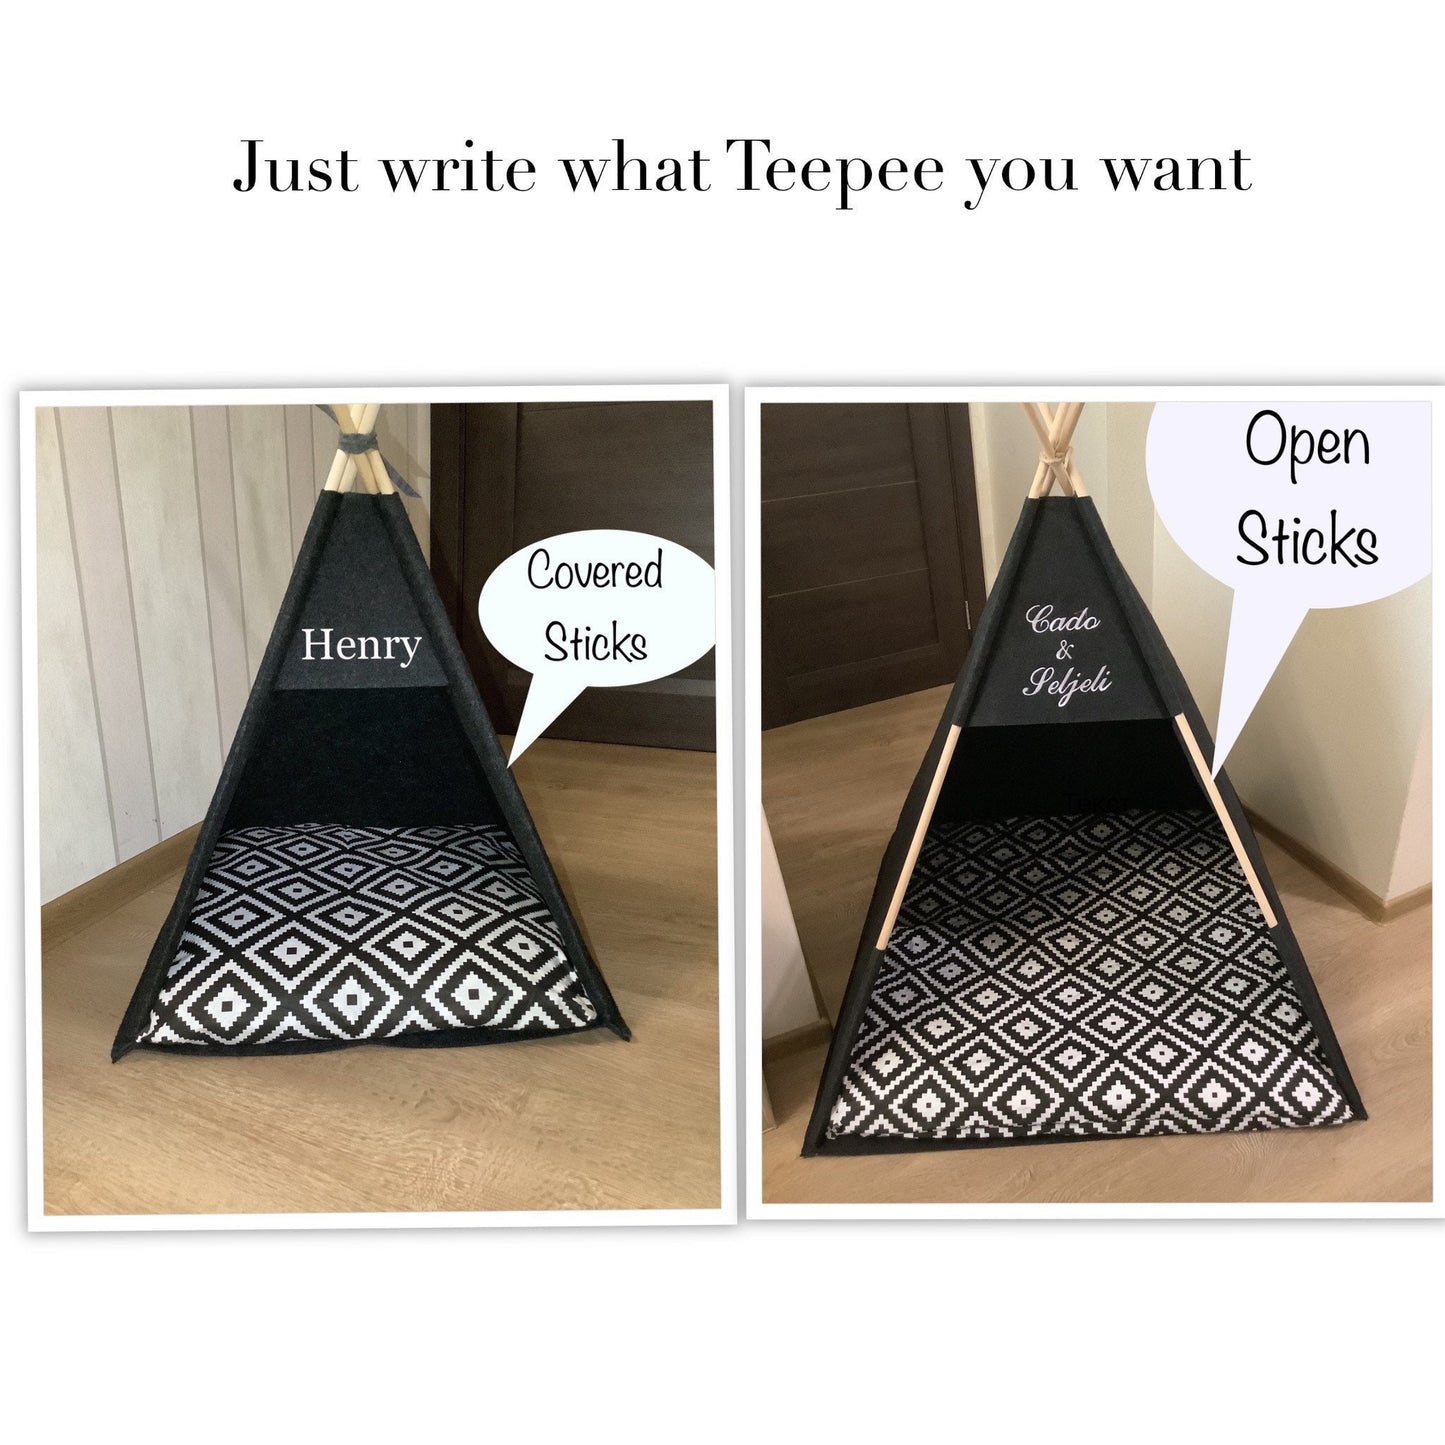 Mini Teepee Dog bed pet house Lounger cover puppy tent with black pillow friendly felt strong pyramid cozy relax pillow Bed dogs, cat, bunny